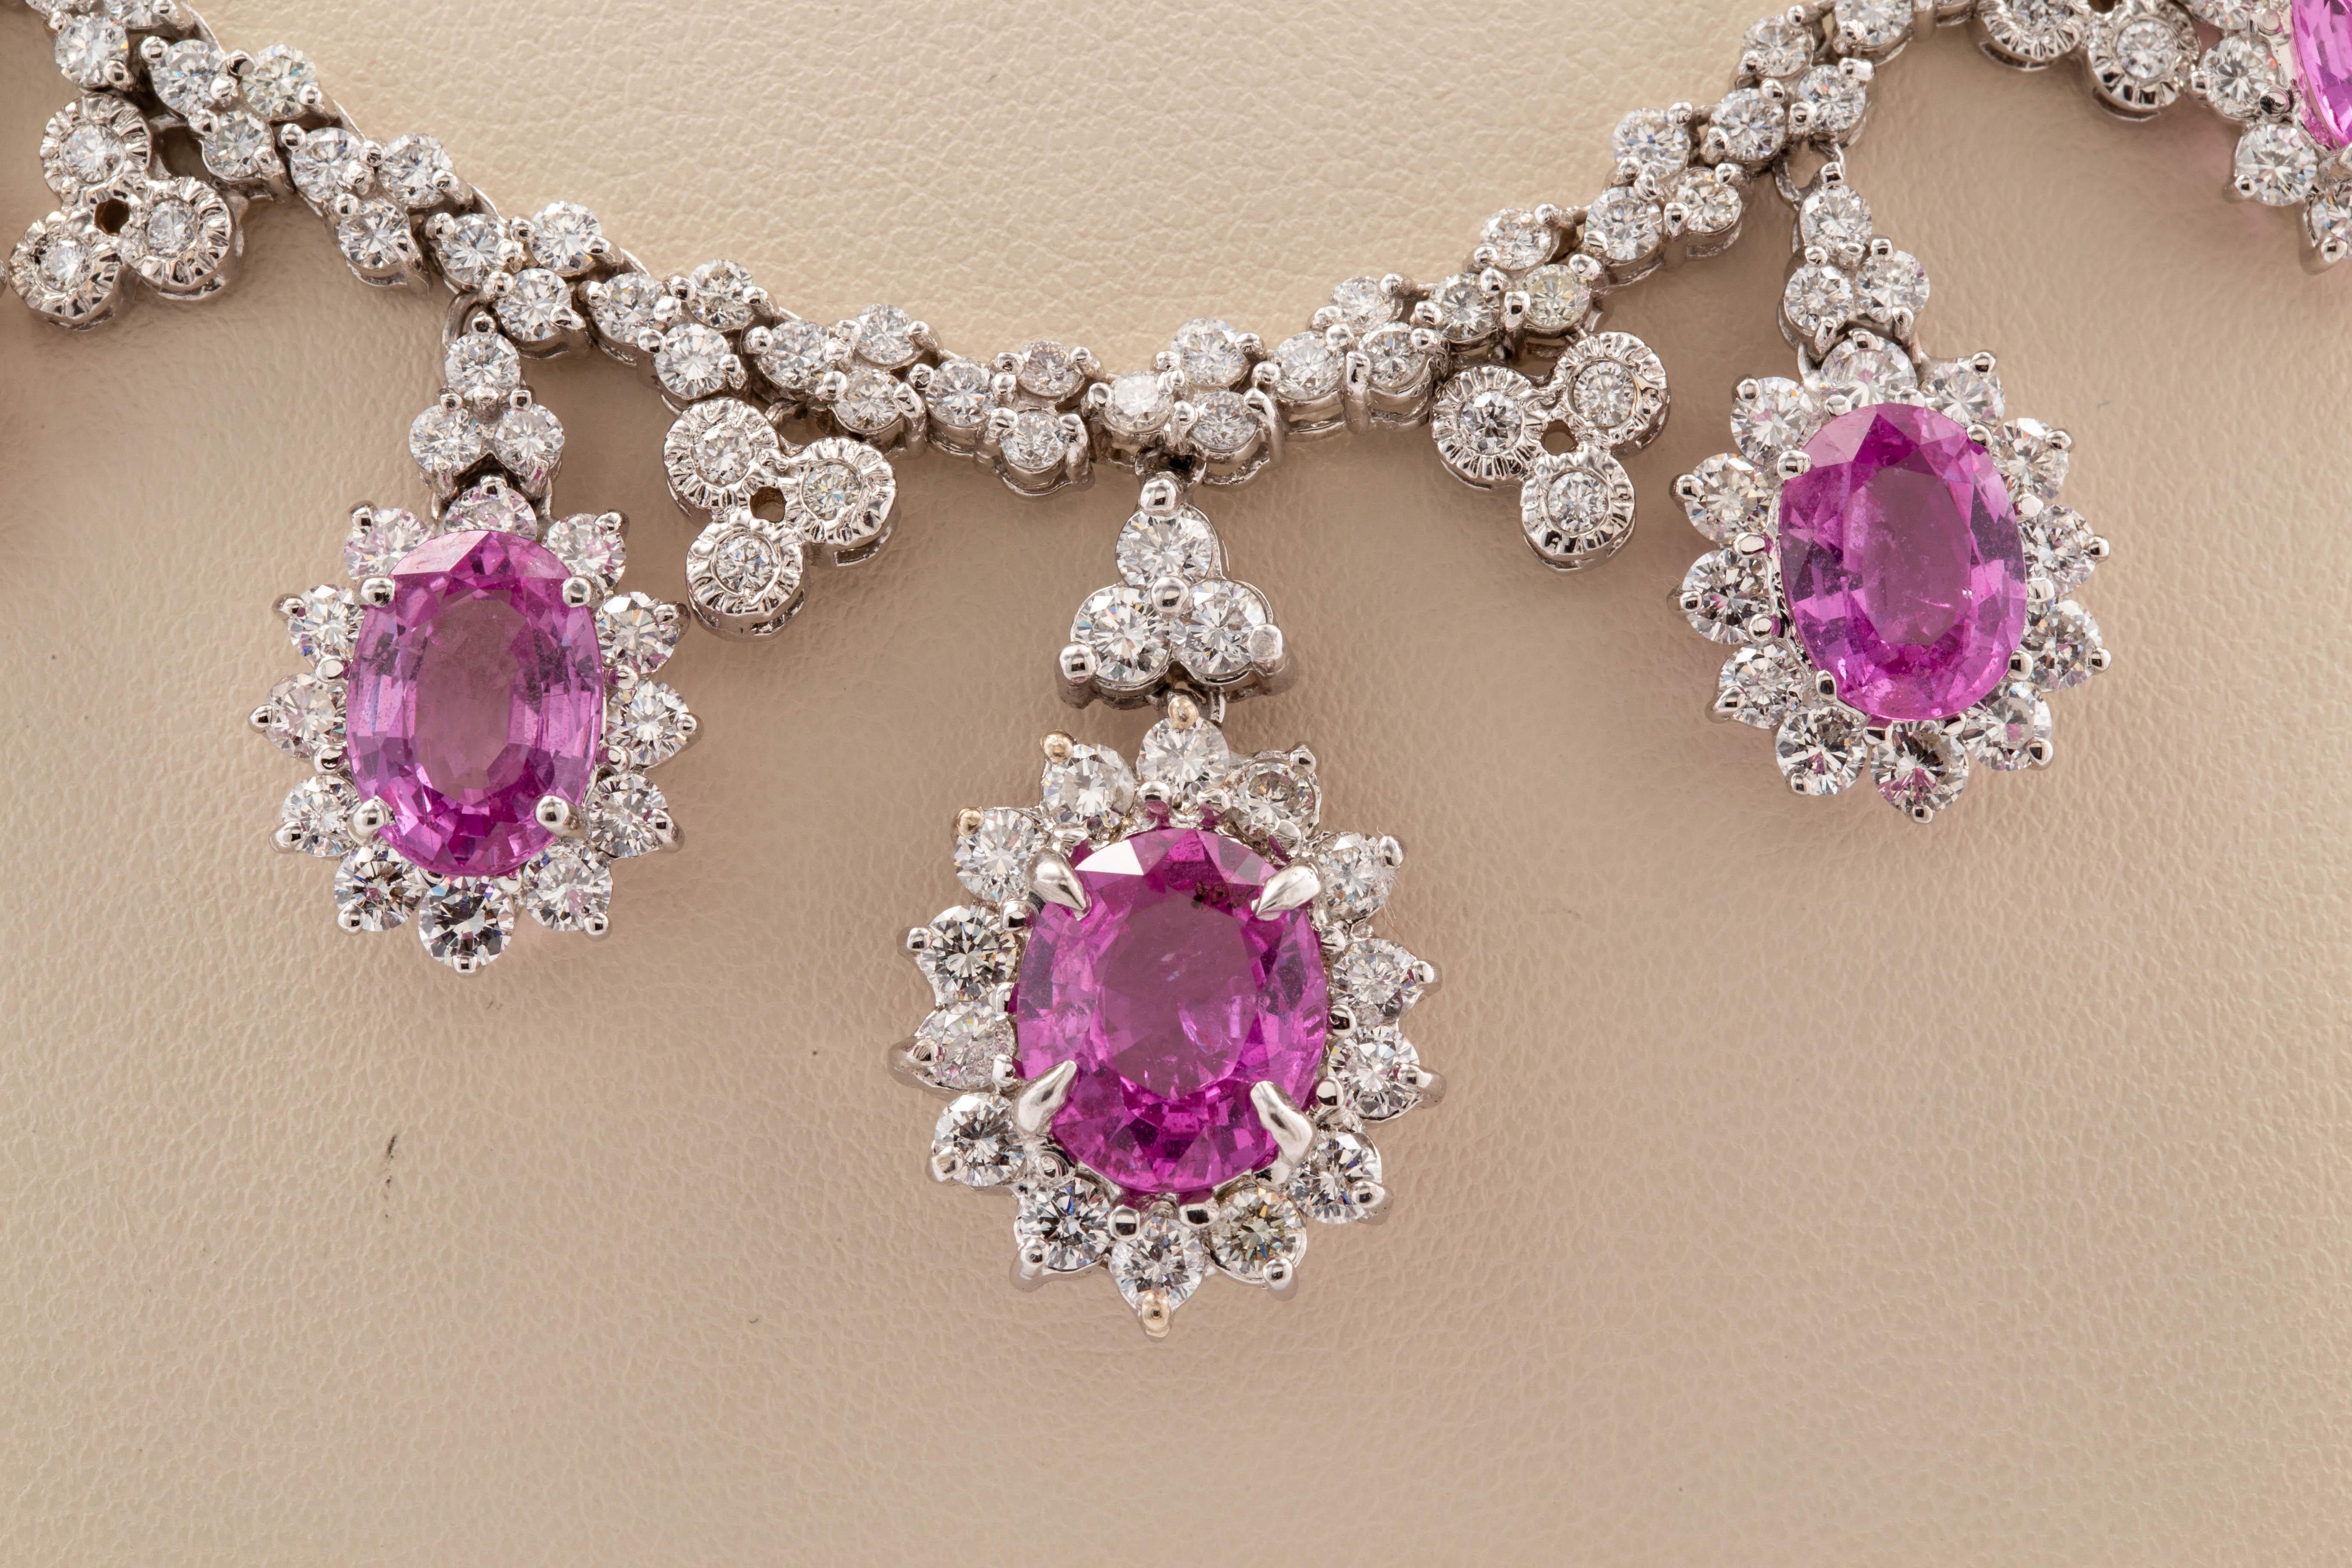 18 karat white gold custom made Pink sapphire and diamond cluster necklace, consisting of 13 oval cut Pink sapphires, with a total carat weigh of 24.60 carats, surrounded by round brilliant cut diamonds all prong set and dangling from a 16 inch